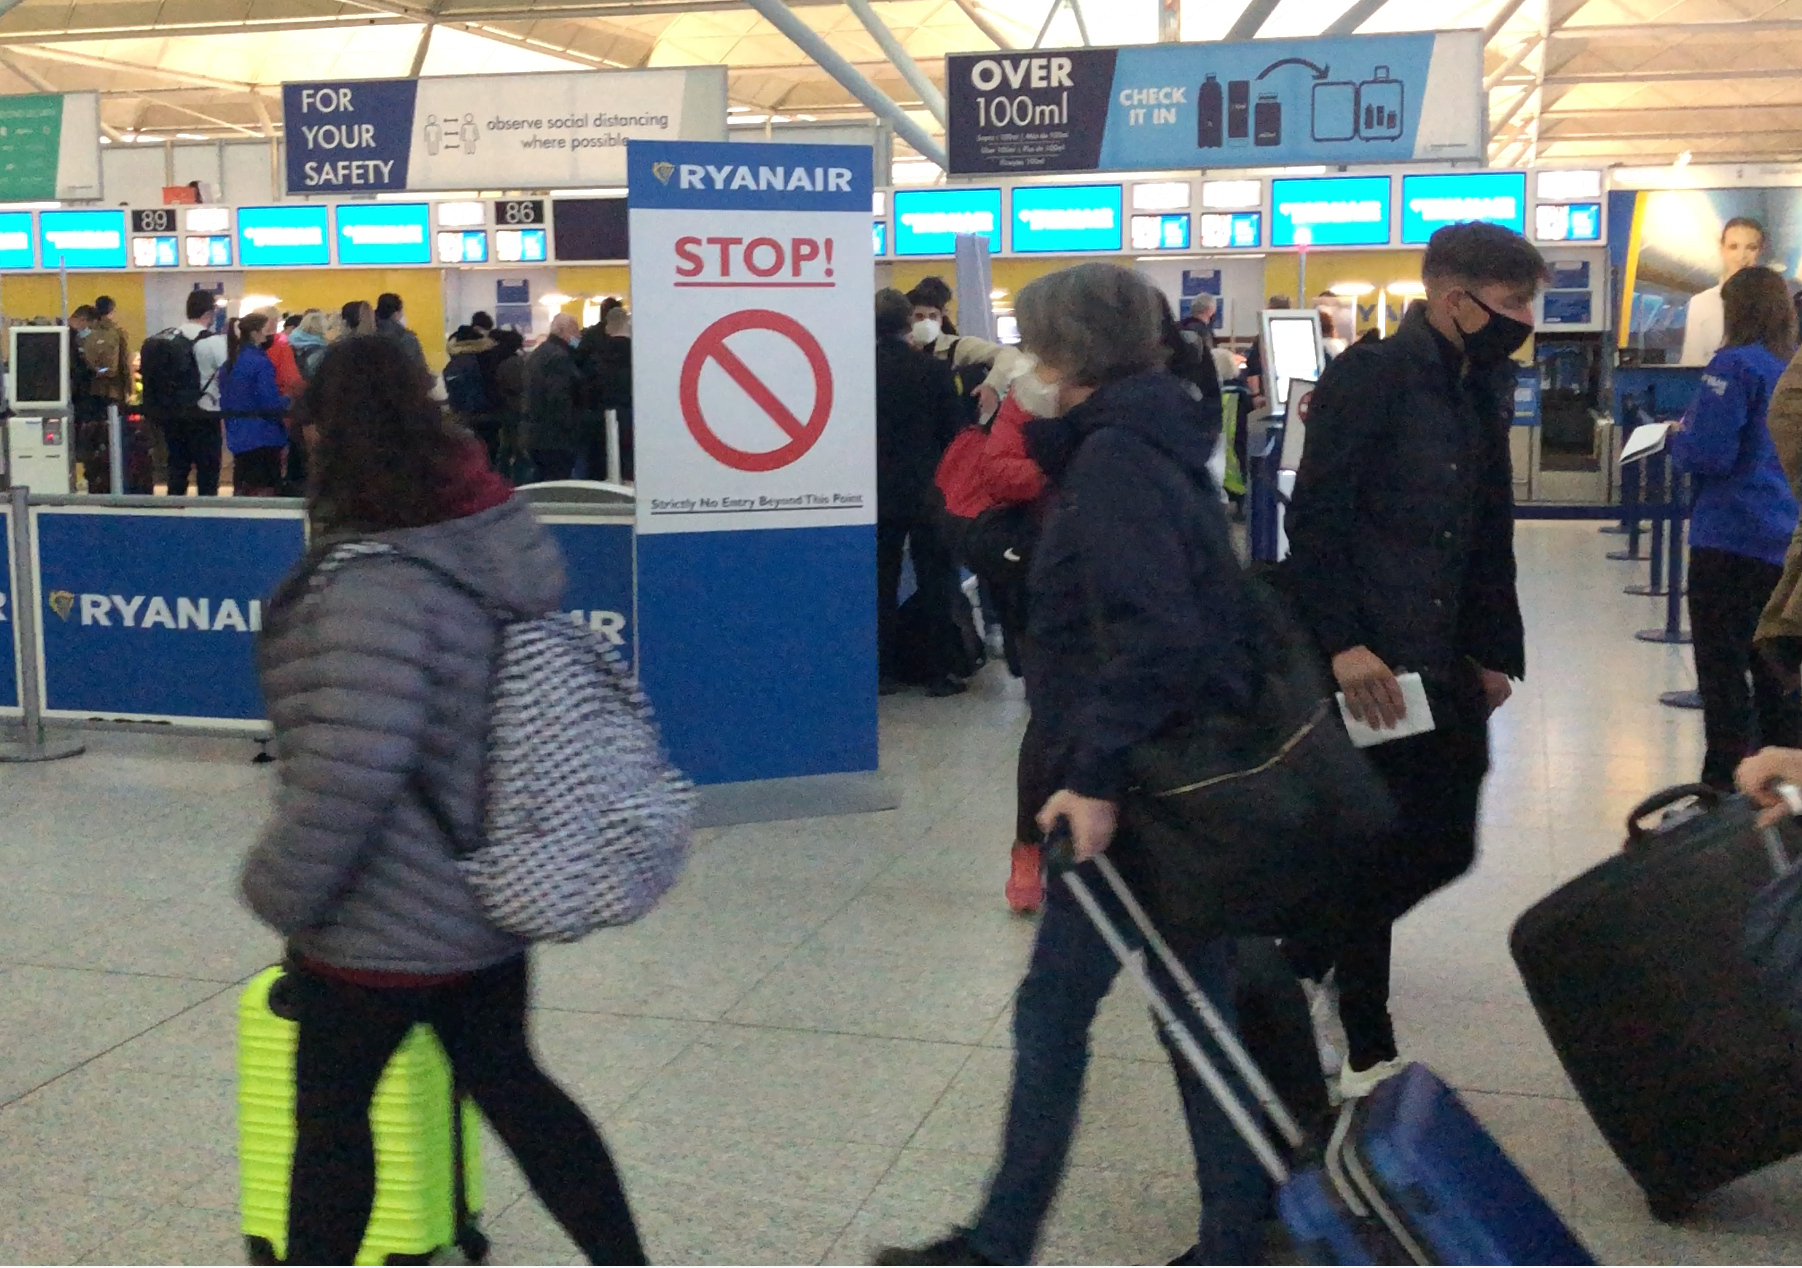 Going places: the check-in queue for Ryanair at Stansted airport